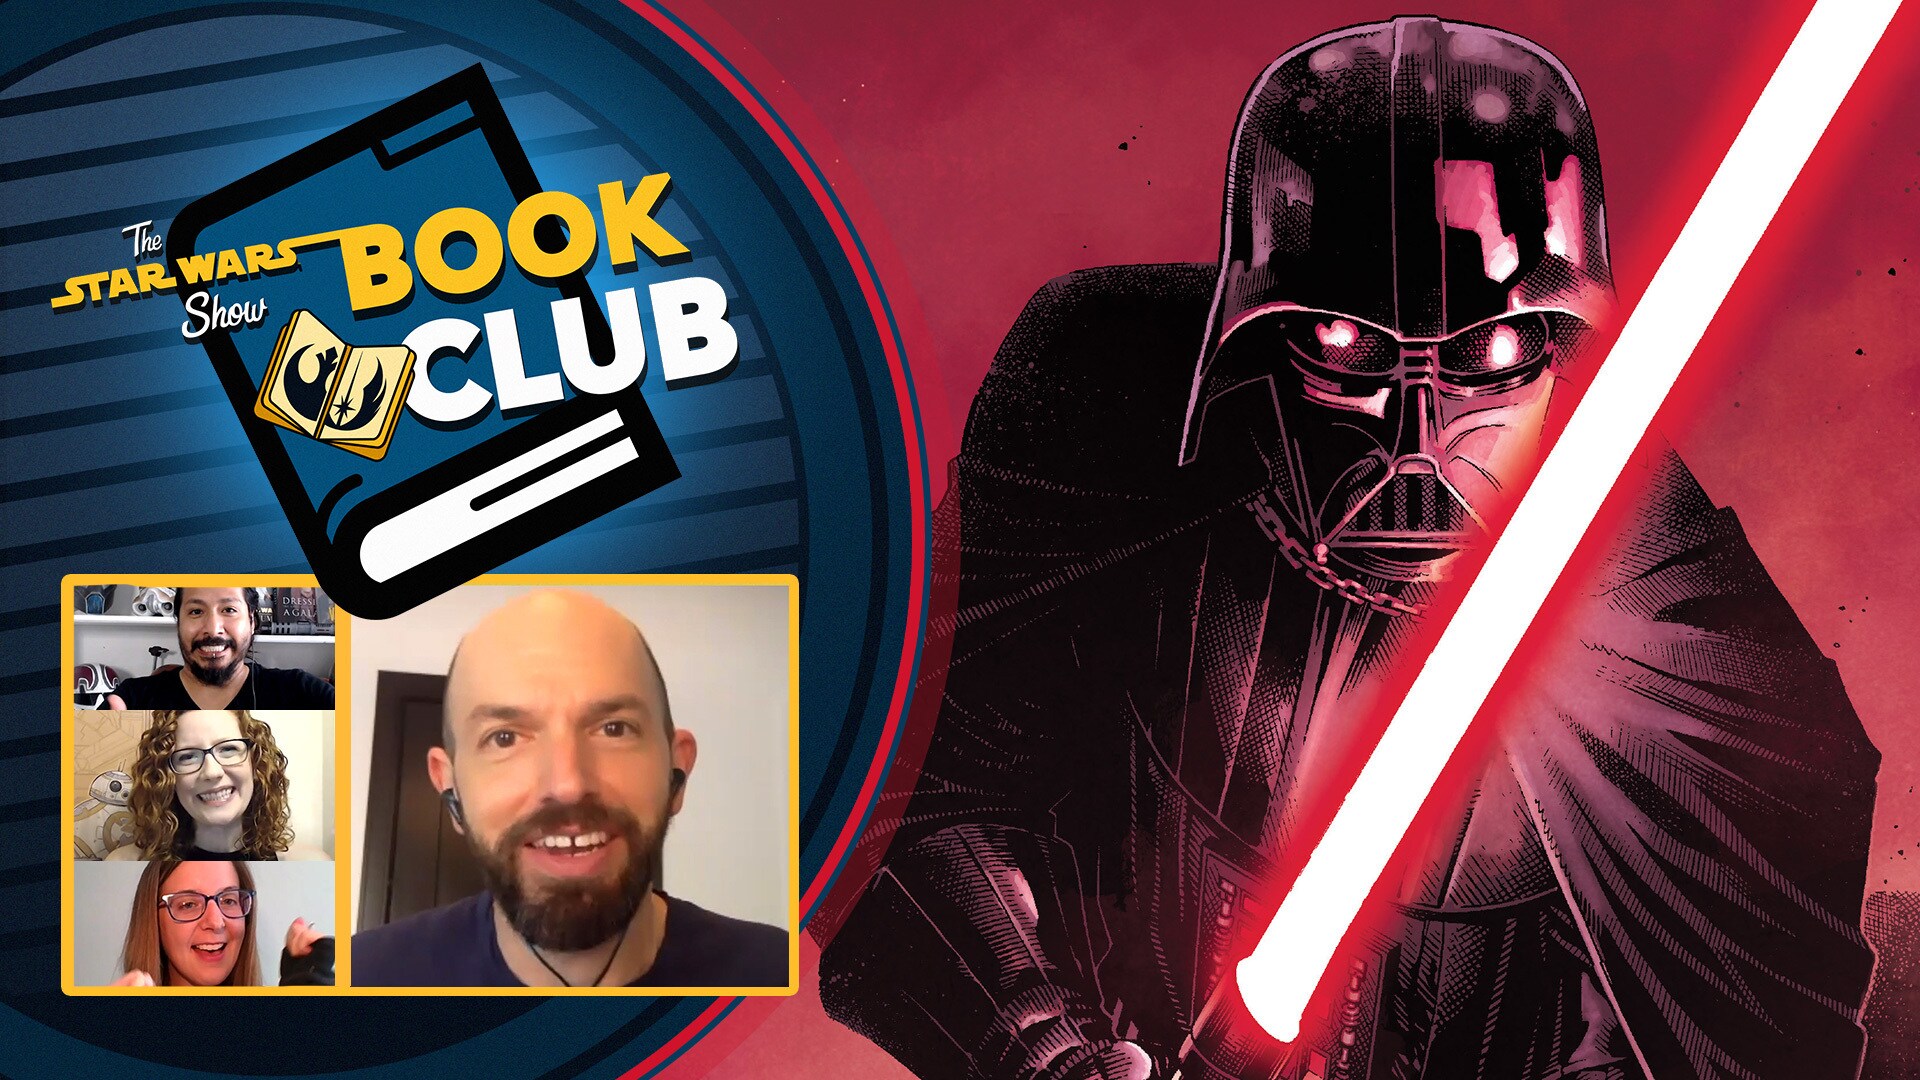 Darth Vader: Imperial Machine | The Star Wars Show Book Club